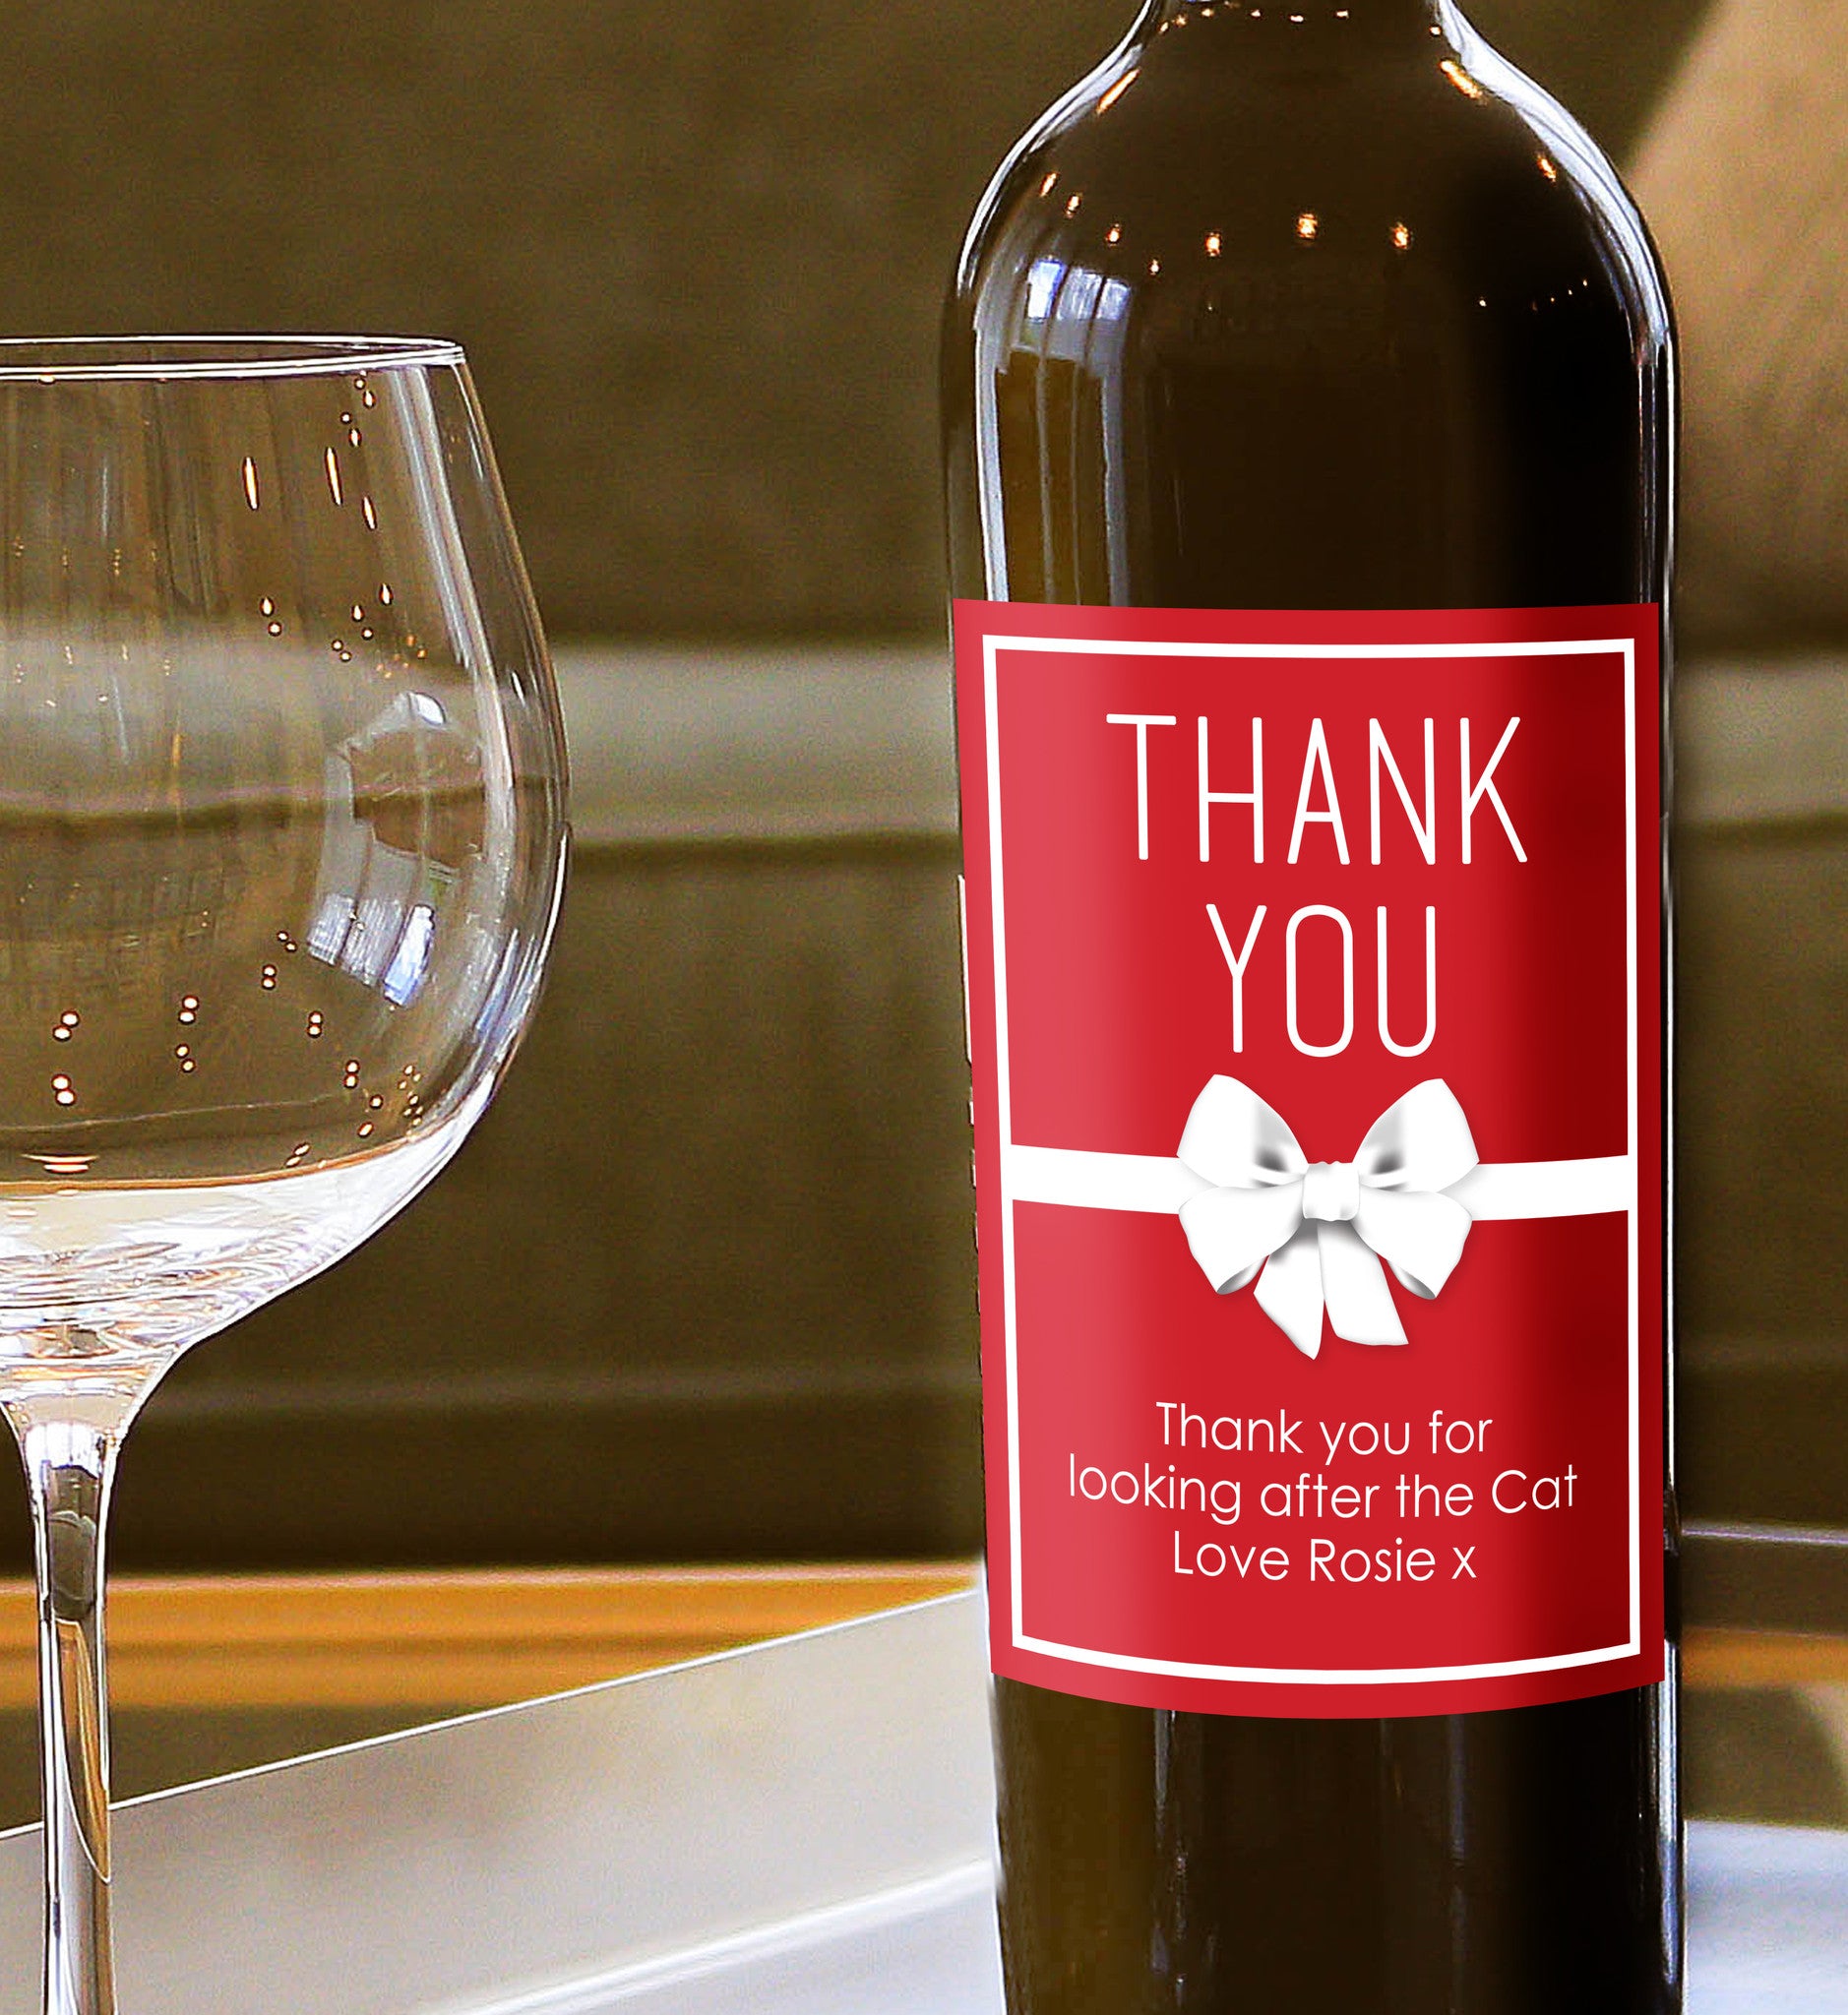 thank you wine